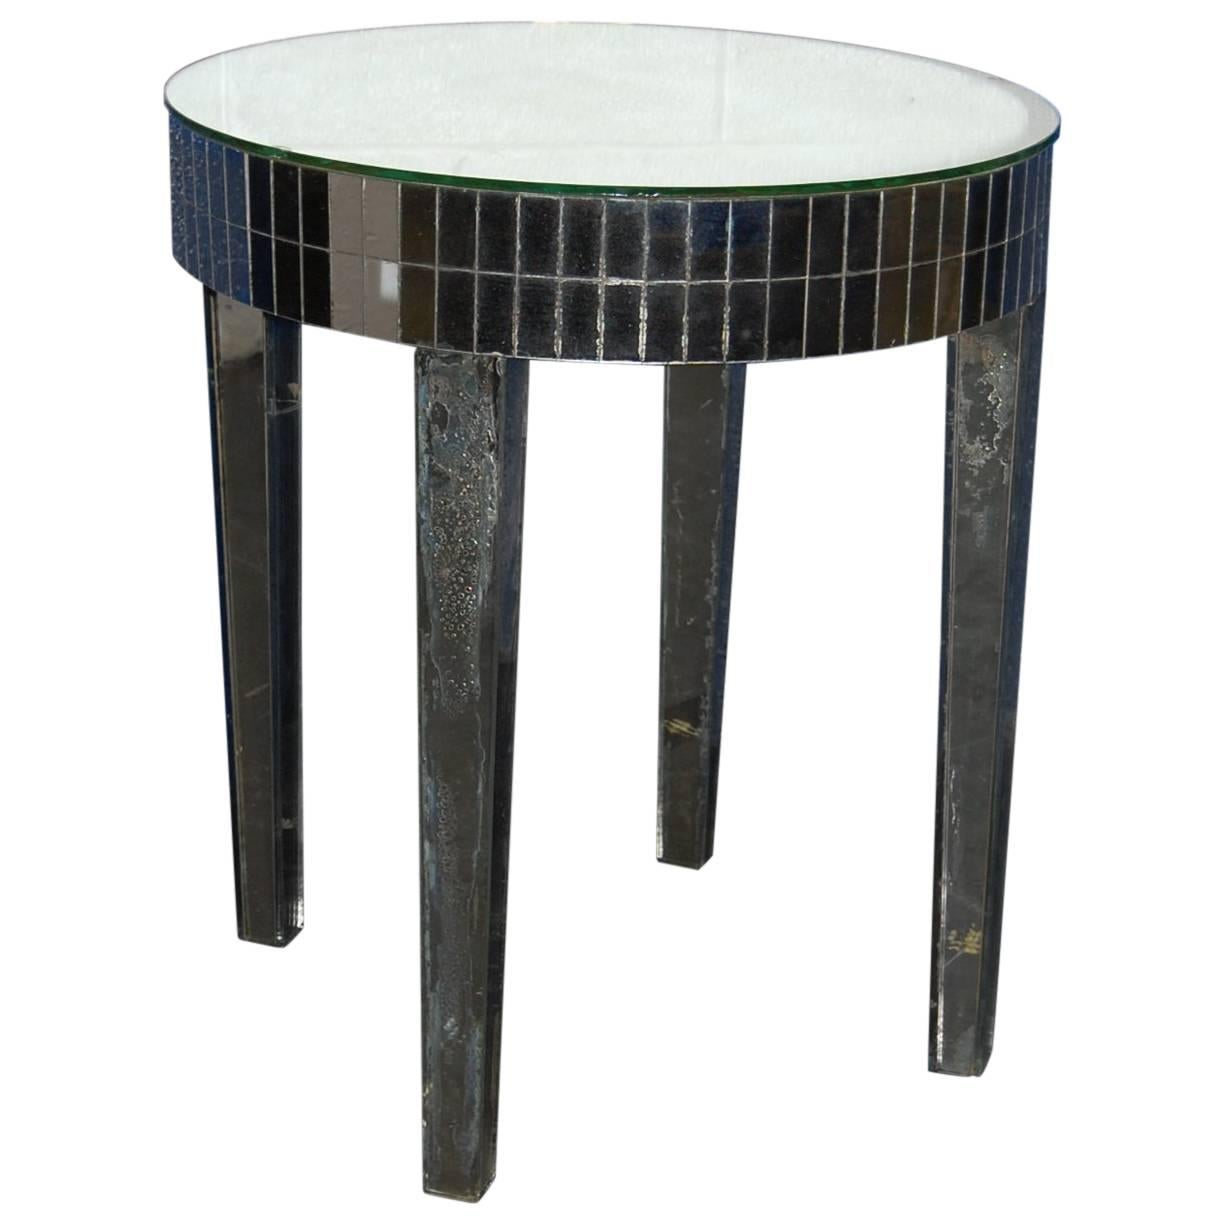 Mid-20th Century Circular Mirrored Side Table For Sale